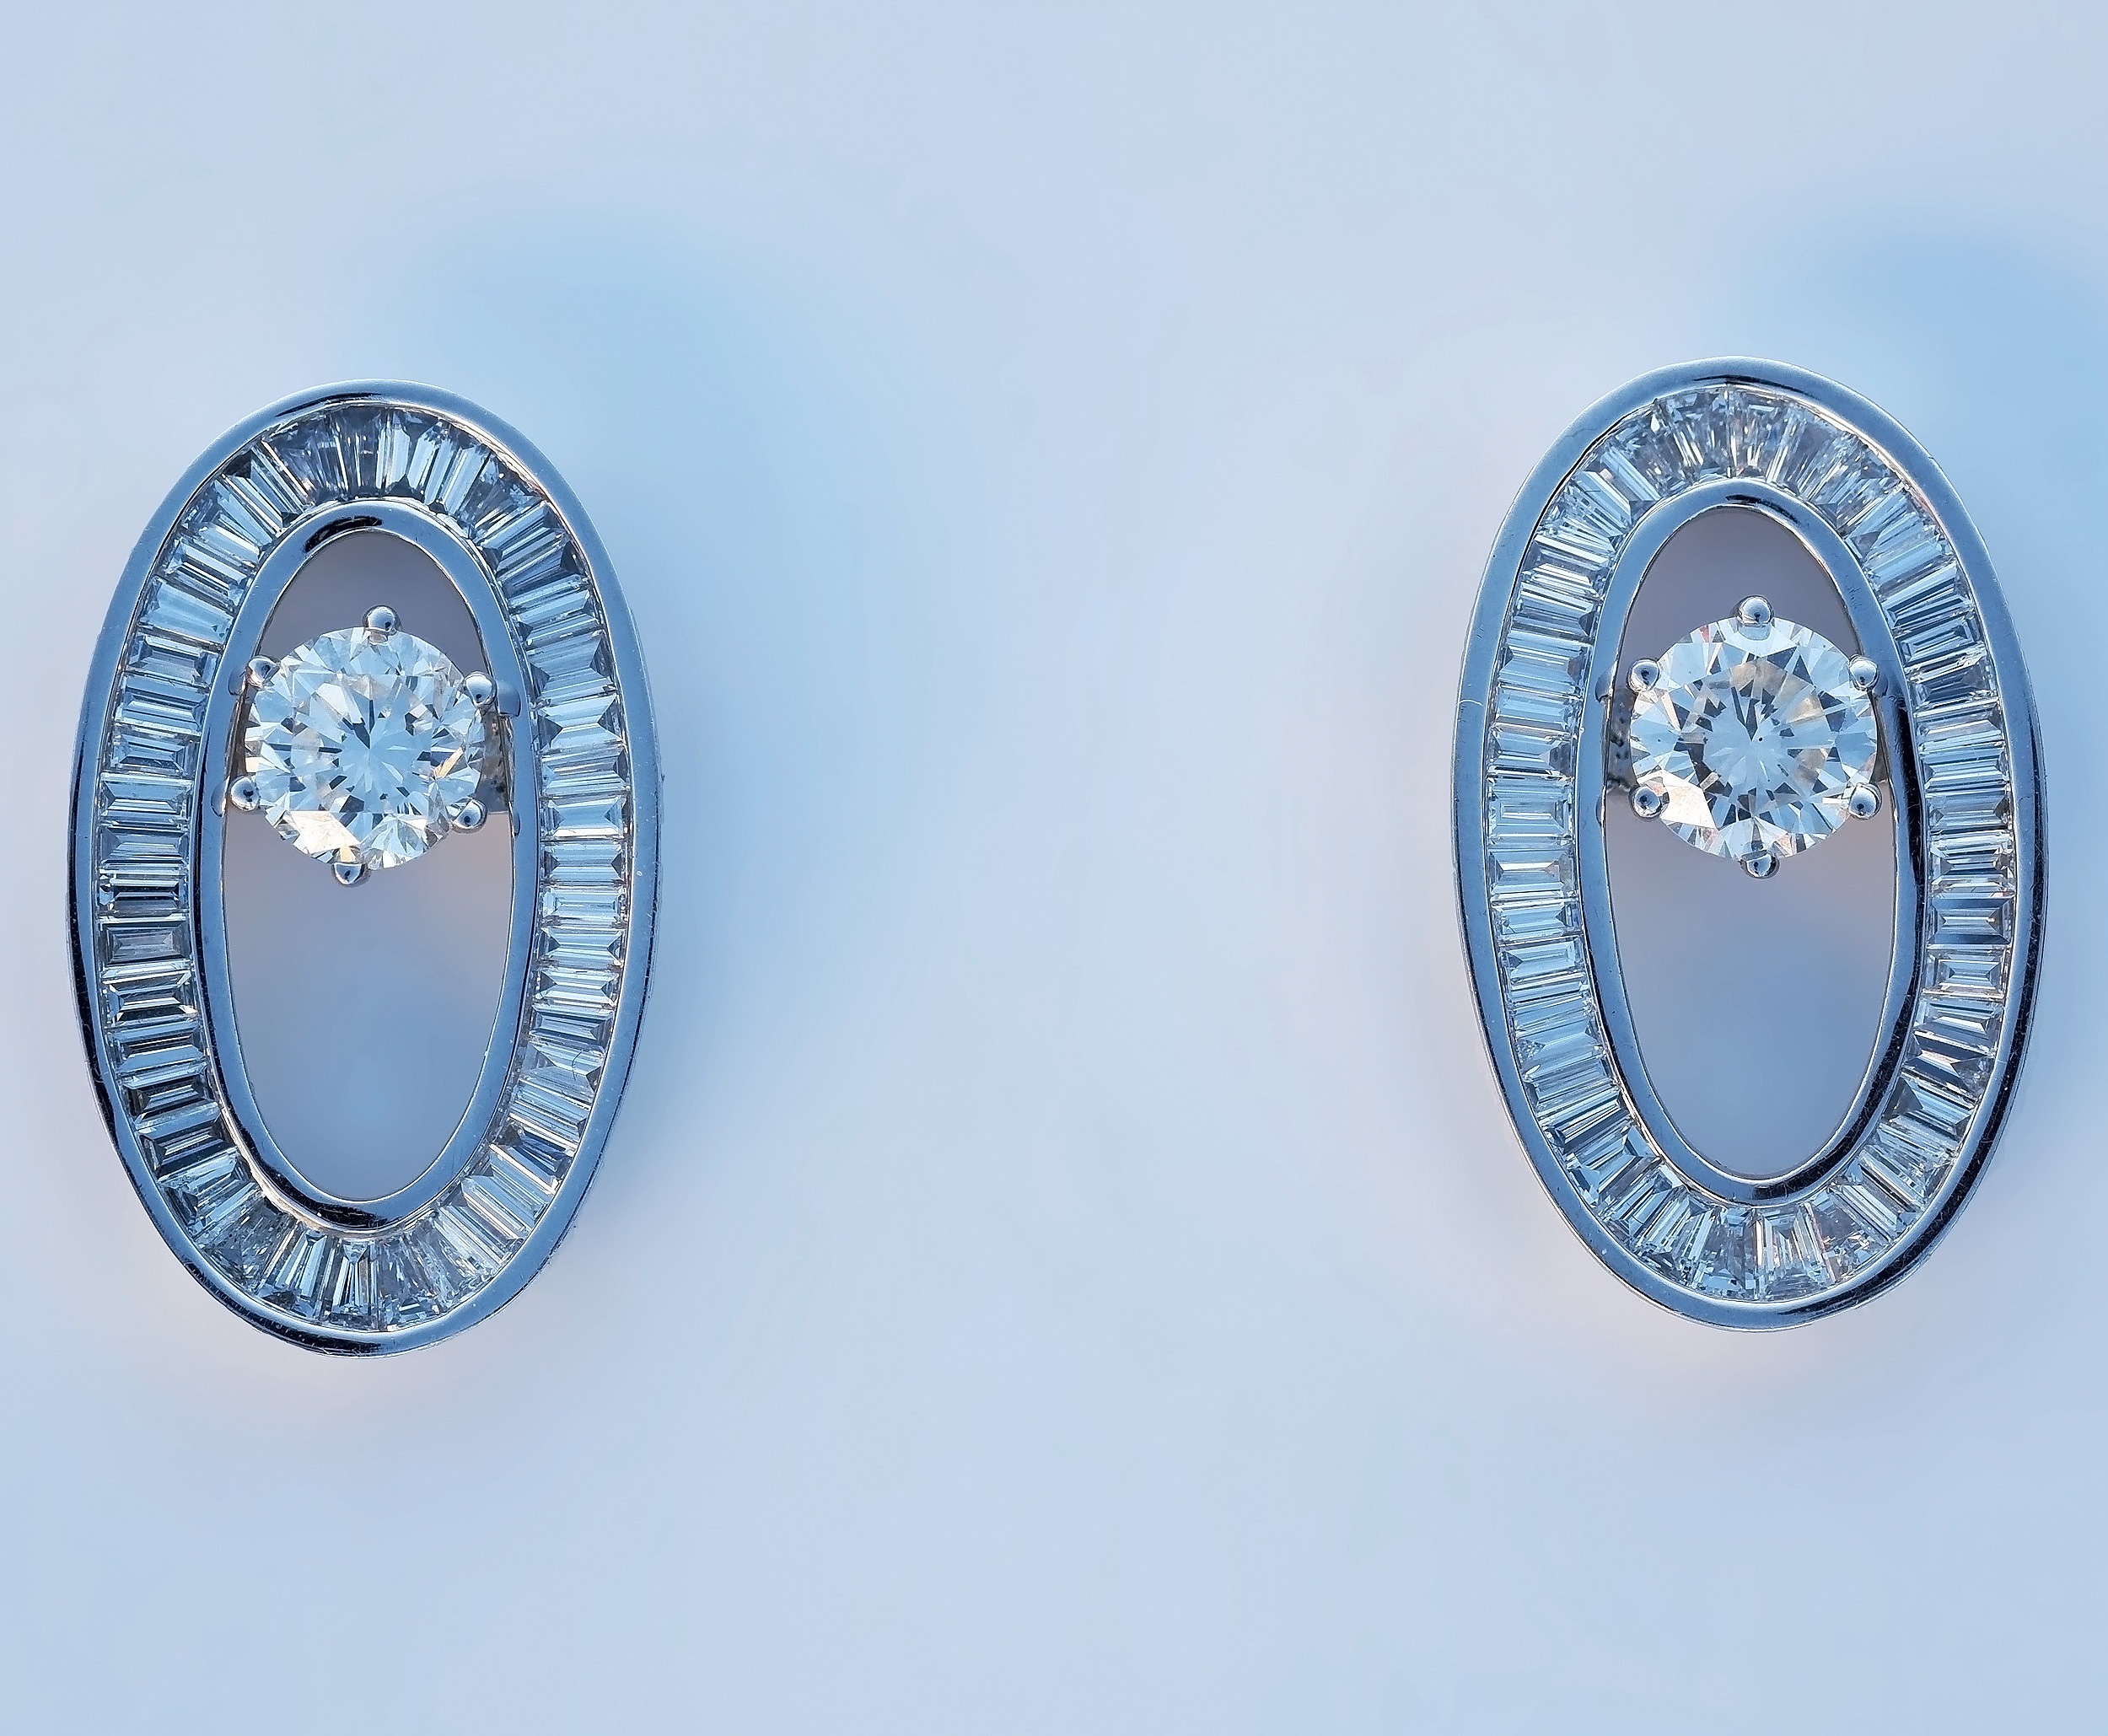 'A Superb Pair of 18ct White Gold Diamond Stud Earrings with Removable Oval Frame of Baguette and Tapered Baguette Diamonds'